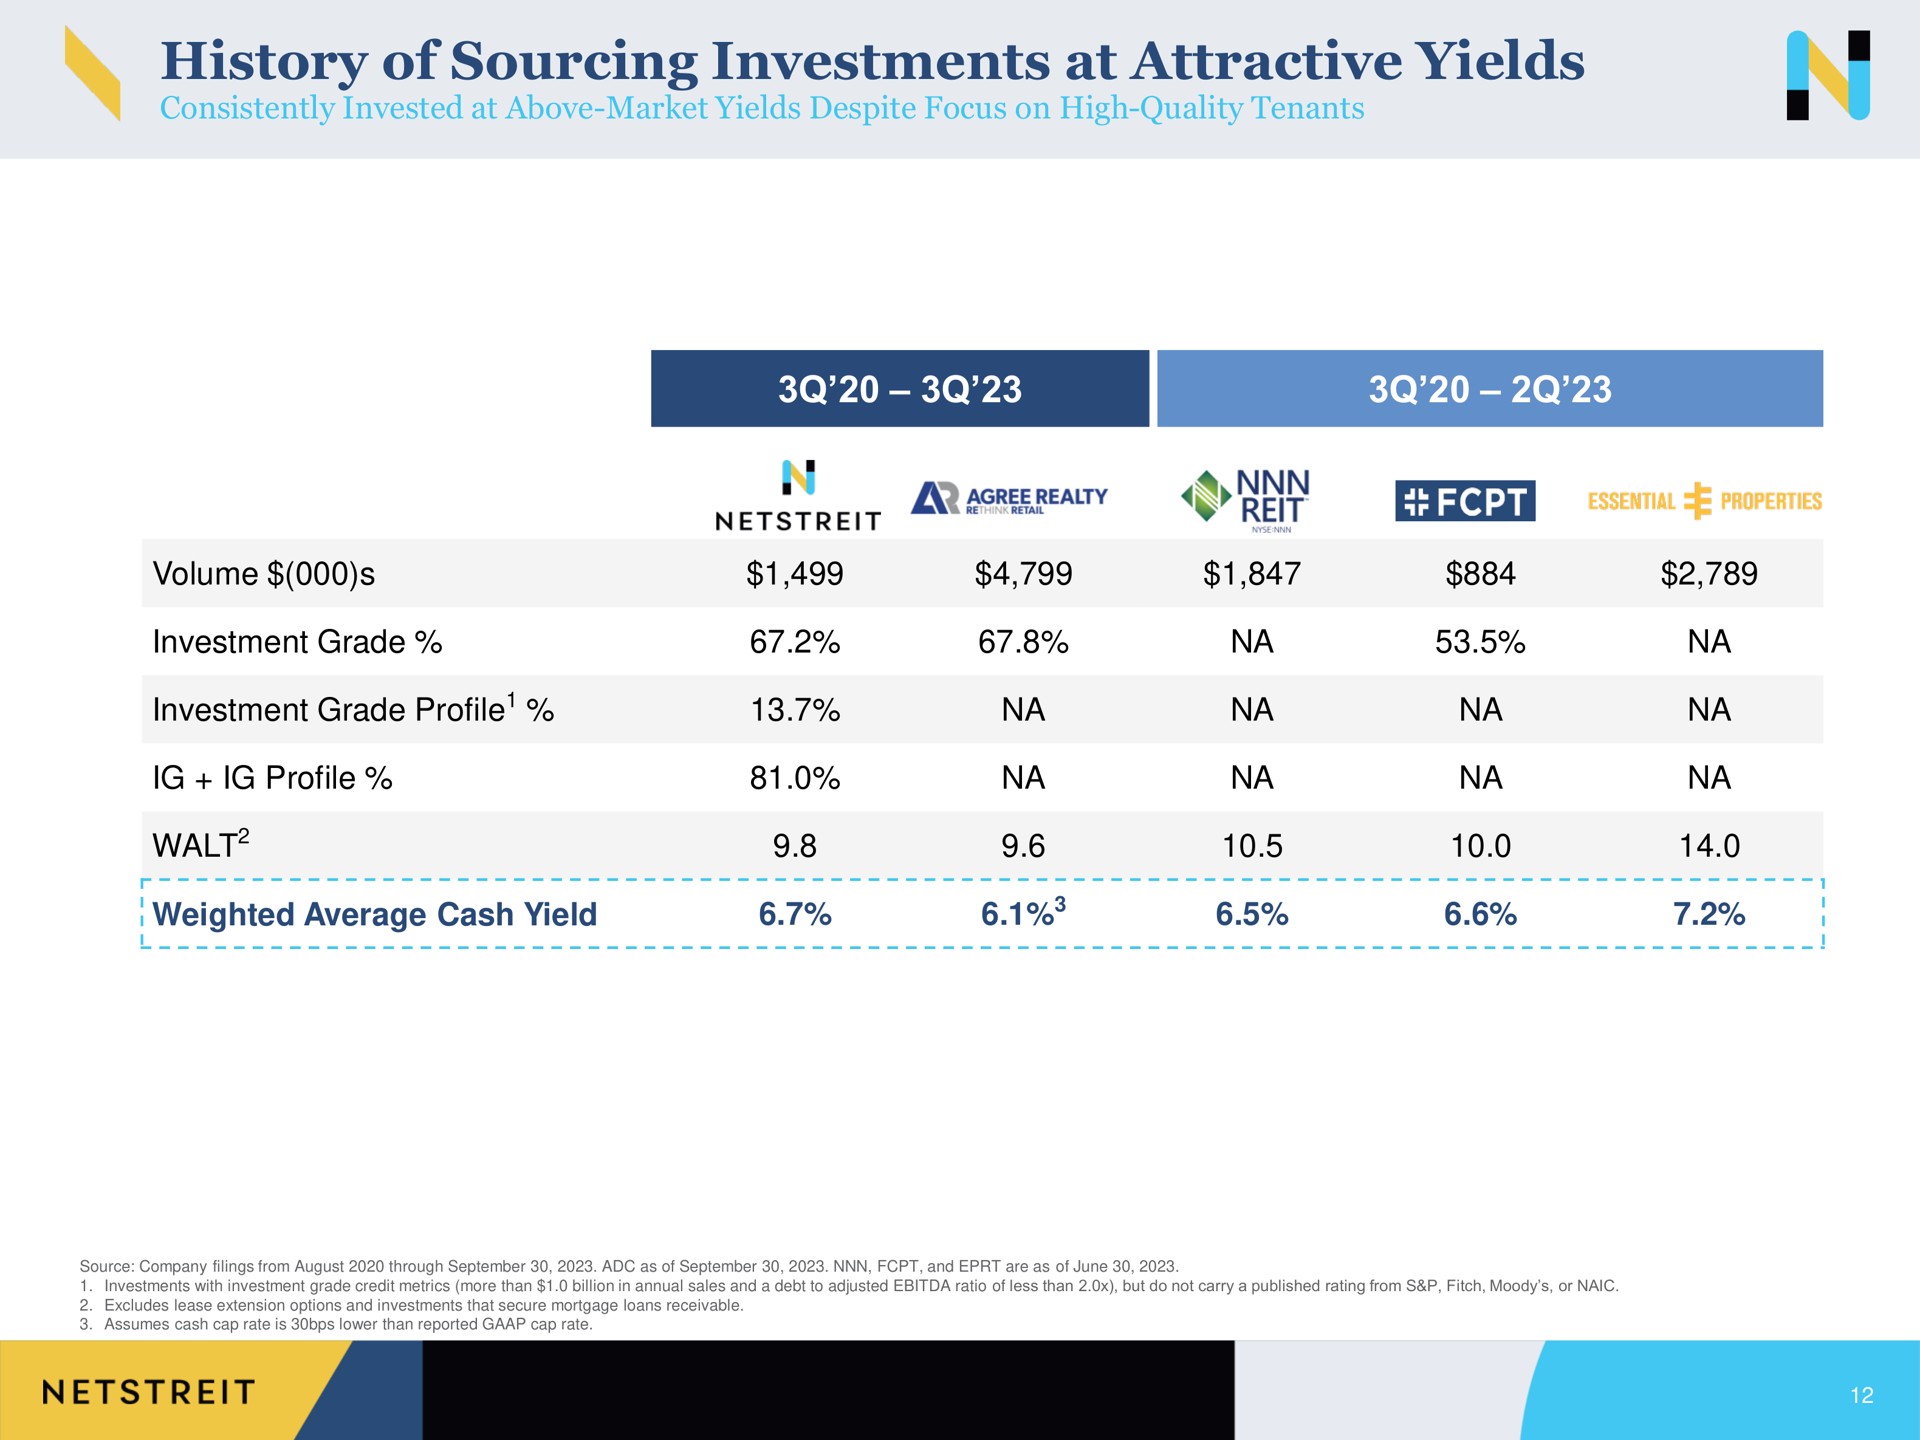 history of sourcing investments at attractive yields | Netstreit